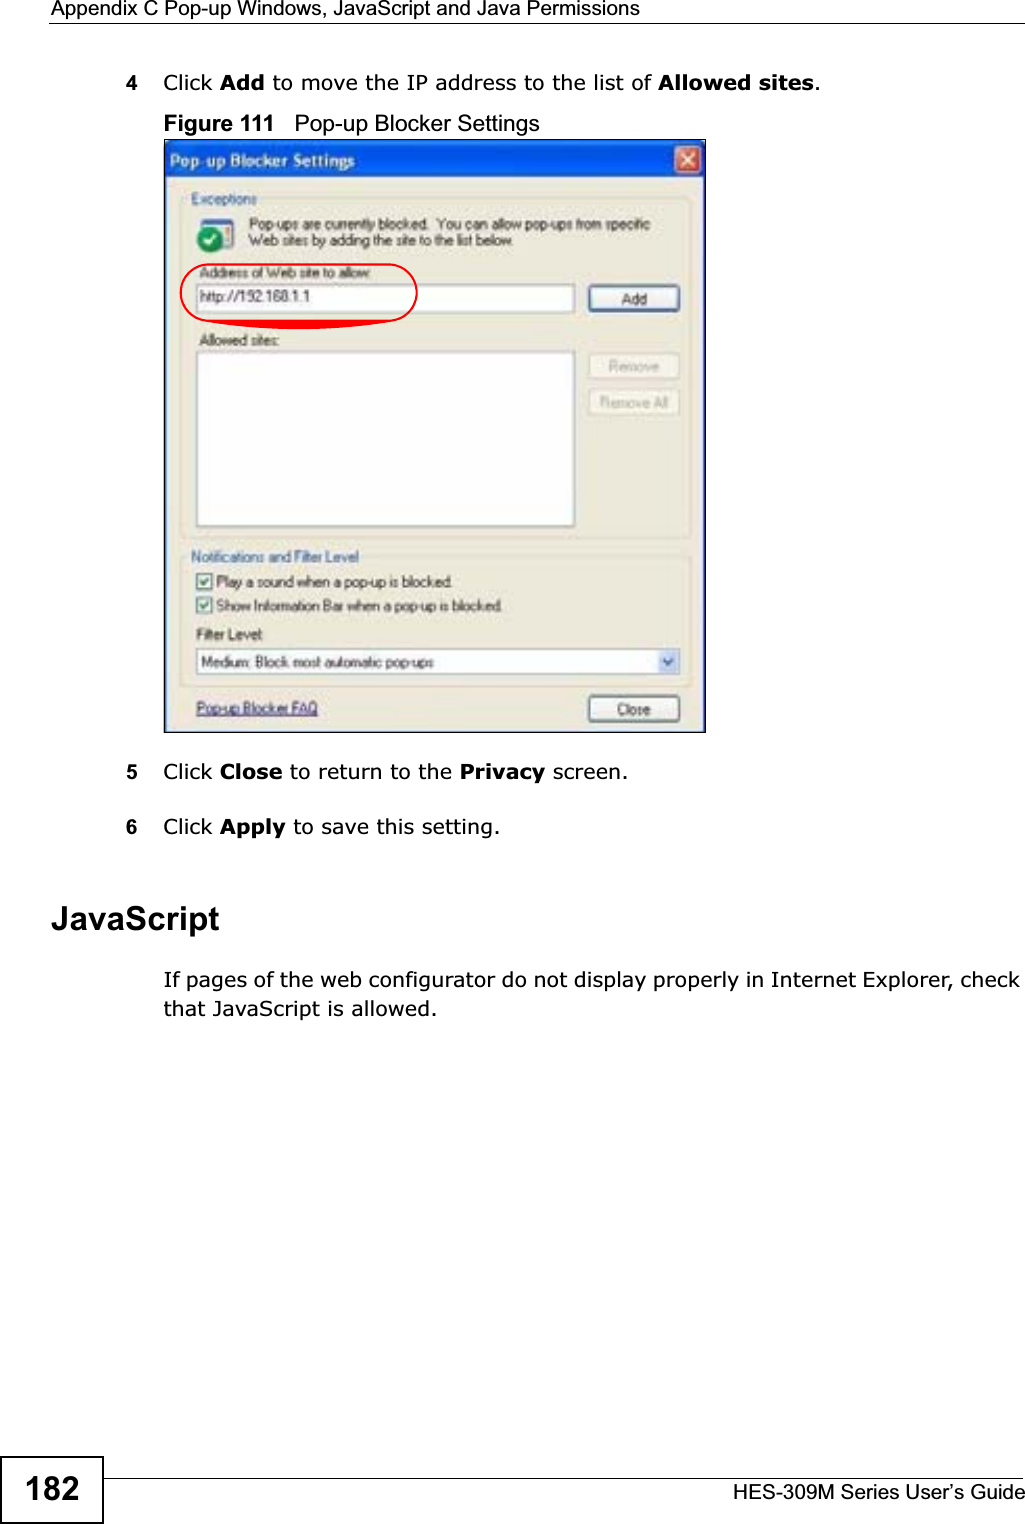 Appendix C Pop-up Windows, JavaScript and Java PermissionsHES-309M Series User’s Guide1824Click Add to move the IP address to the list of Allowed sites.Figure 111   Pop-up Blocker Settings5Click Close to return to the Privacy screen. 6Click Apply to save this setting. JavaScriptIf pages of the web configurator do not display properly in Internet Explorer, check that JavaScript is allowed. 